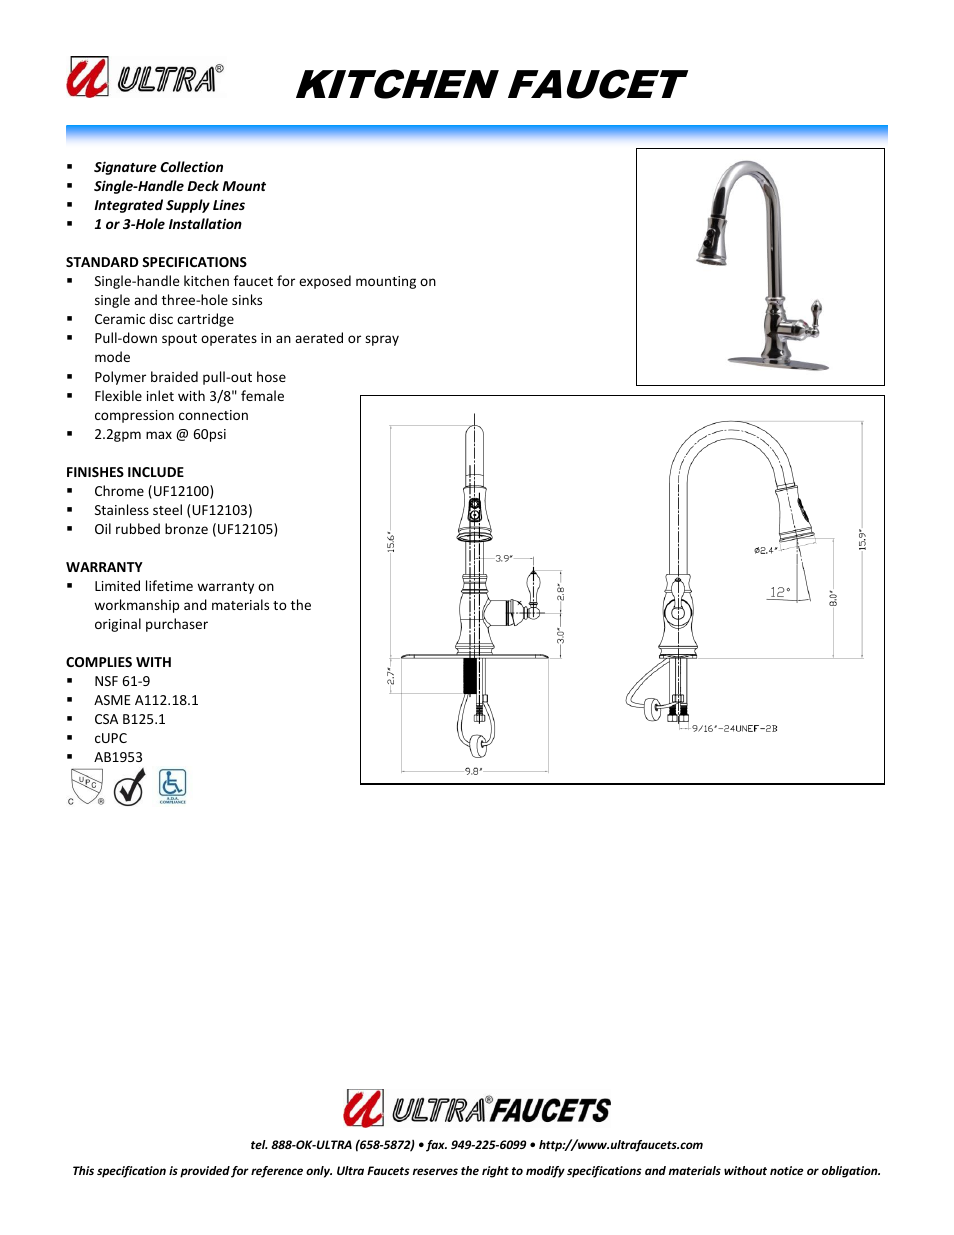 "SIGNATURE COLLECTIONSINGLE-HANDLE KITCHEN FAUCET WITH PULL-DOWN SPRAY"